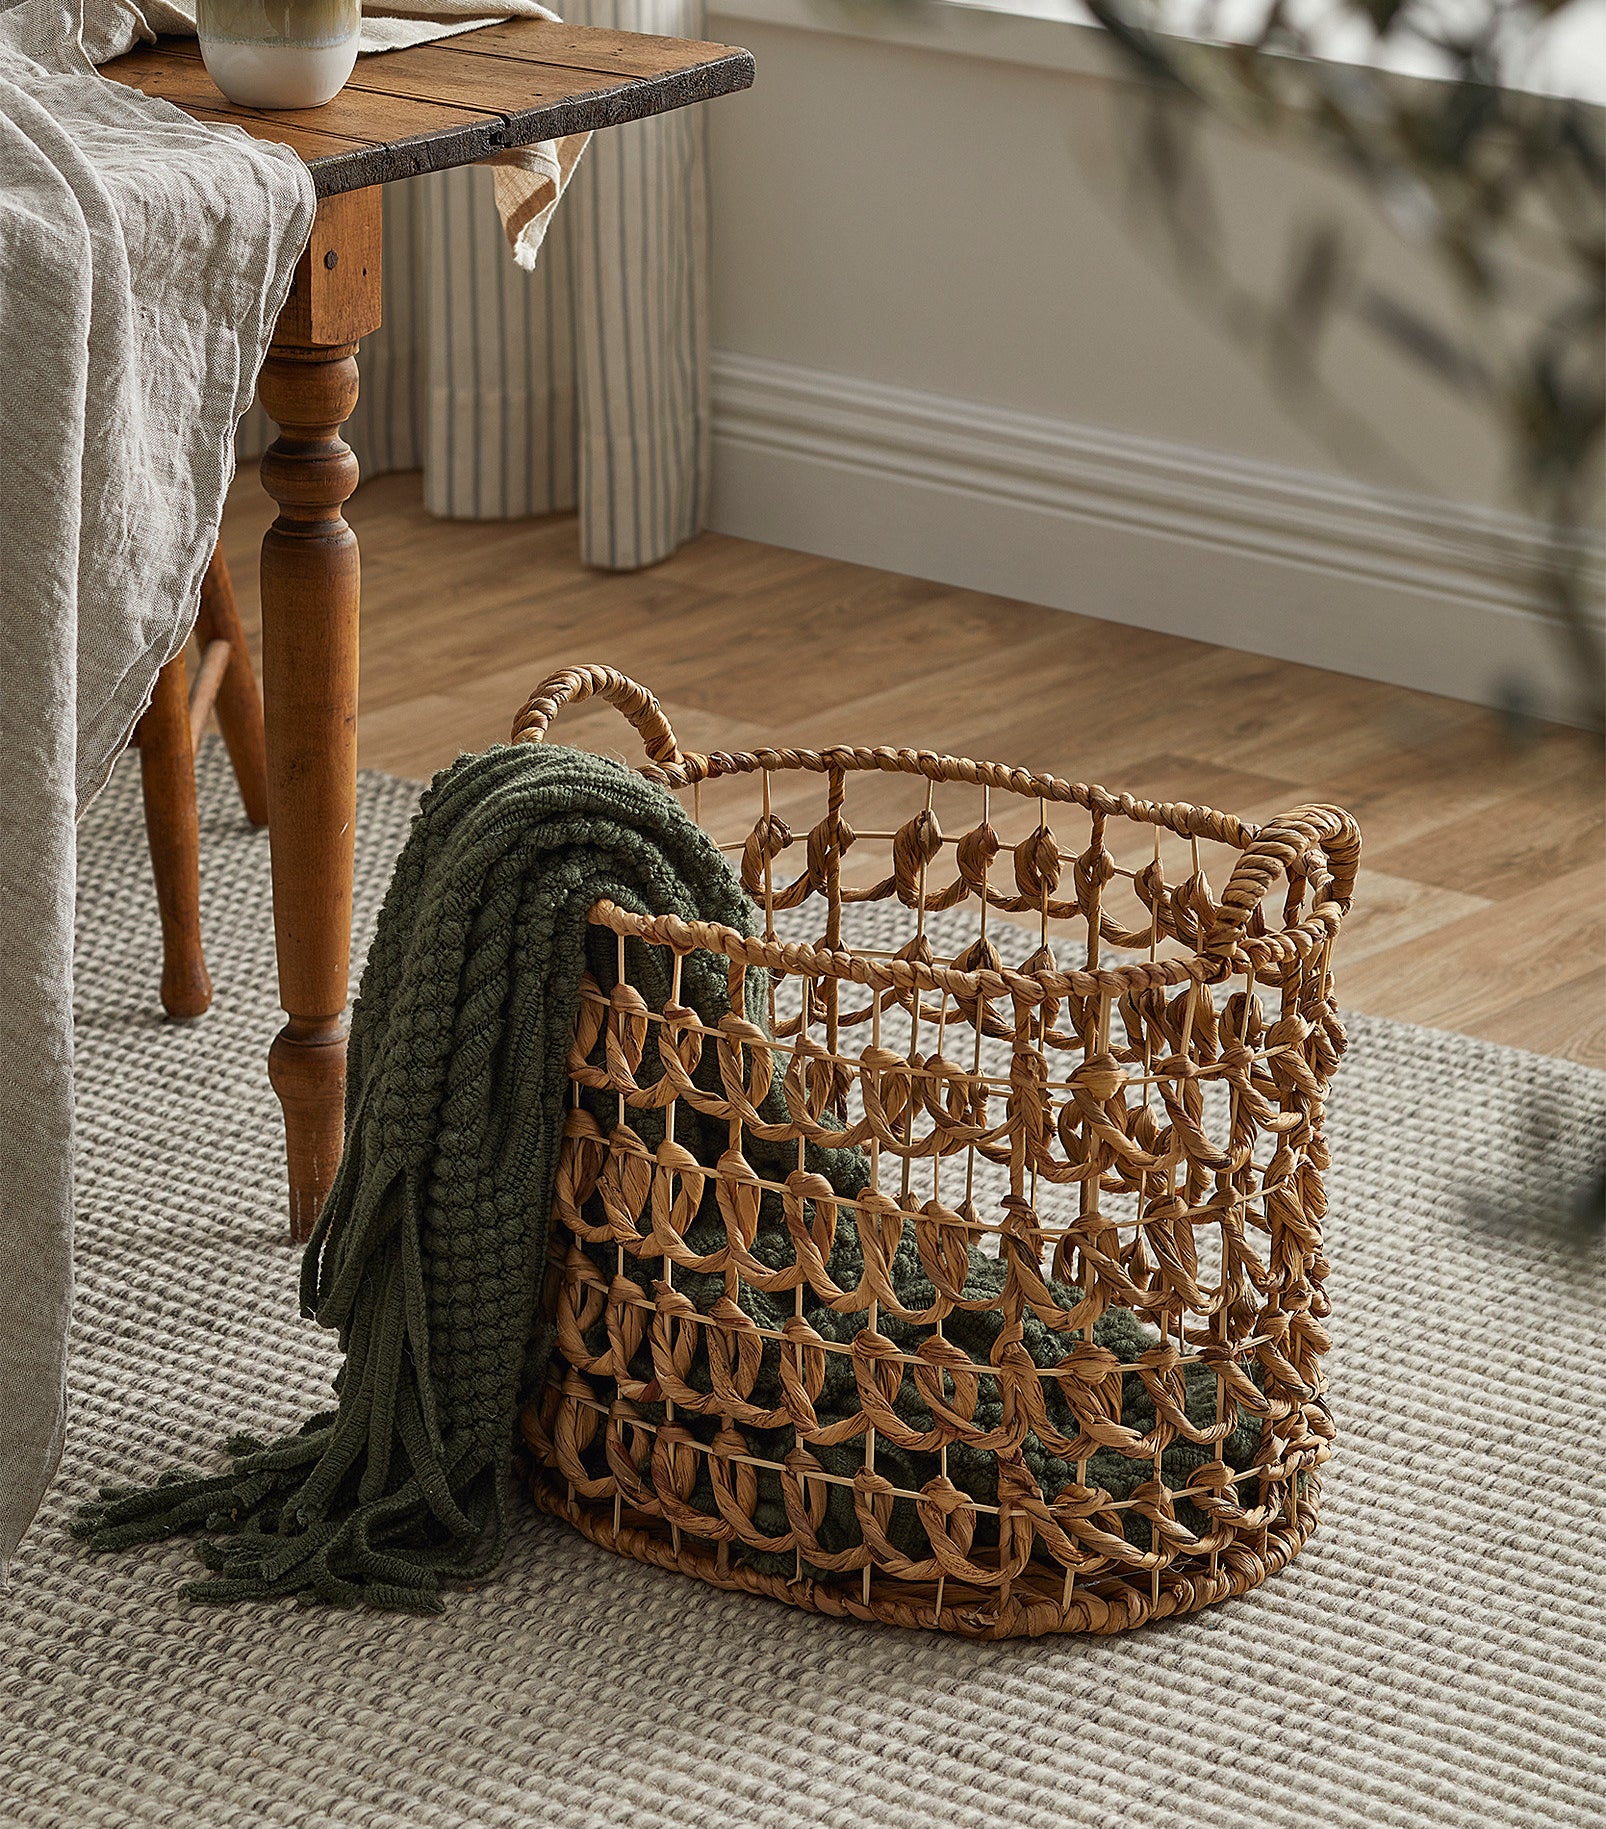 a rustic woven basket with a throw blanket inside